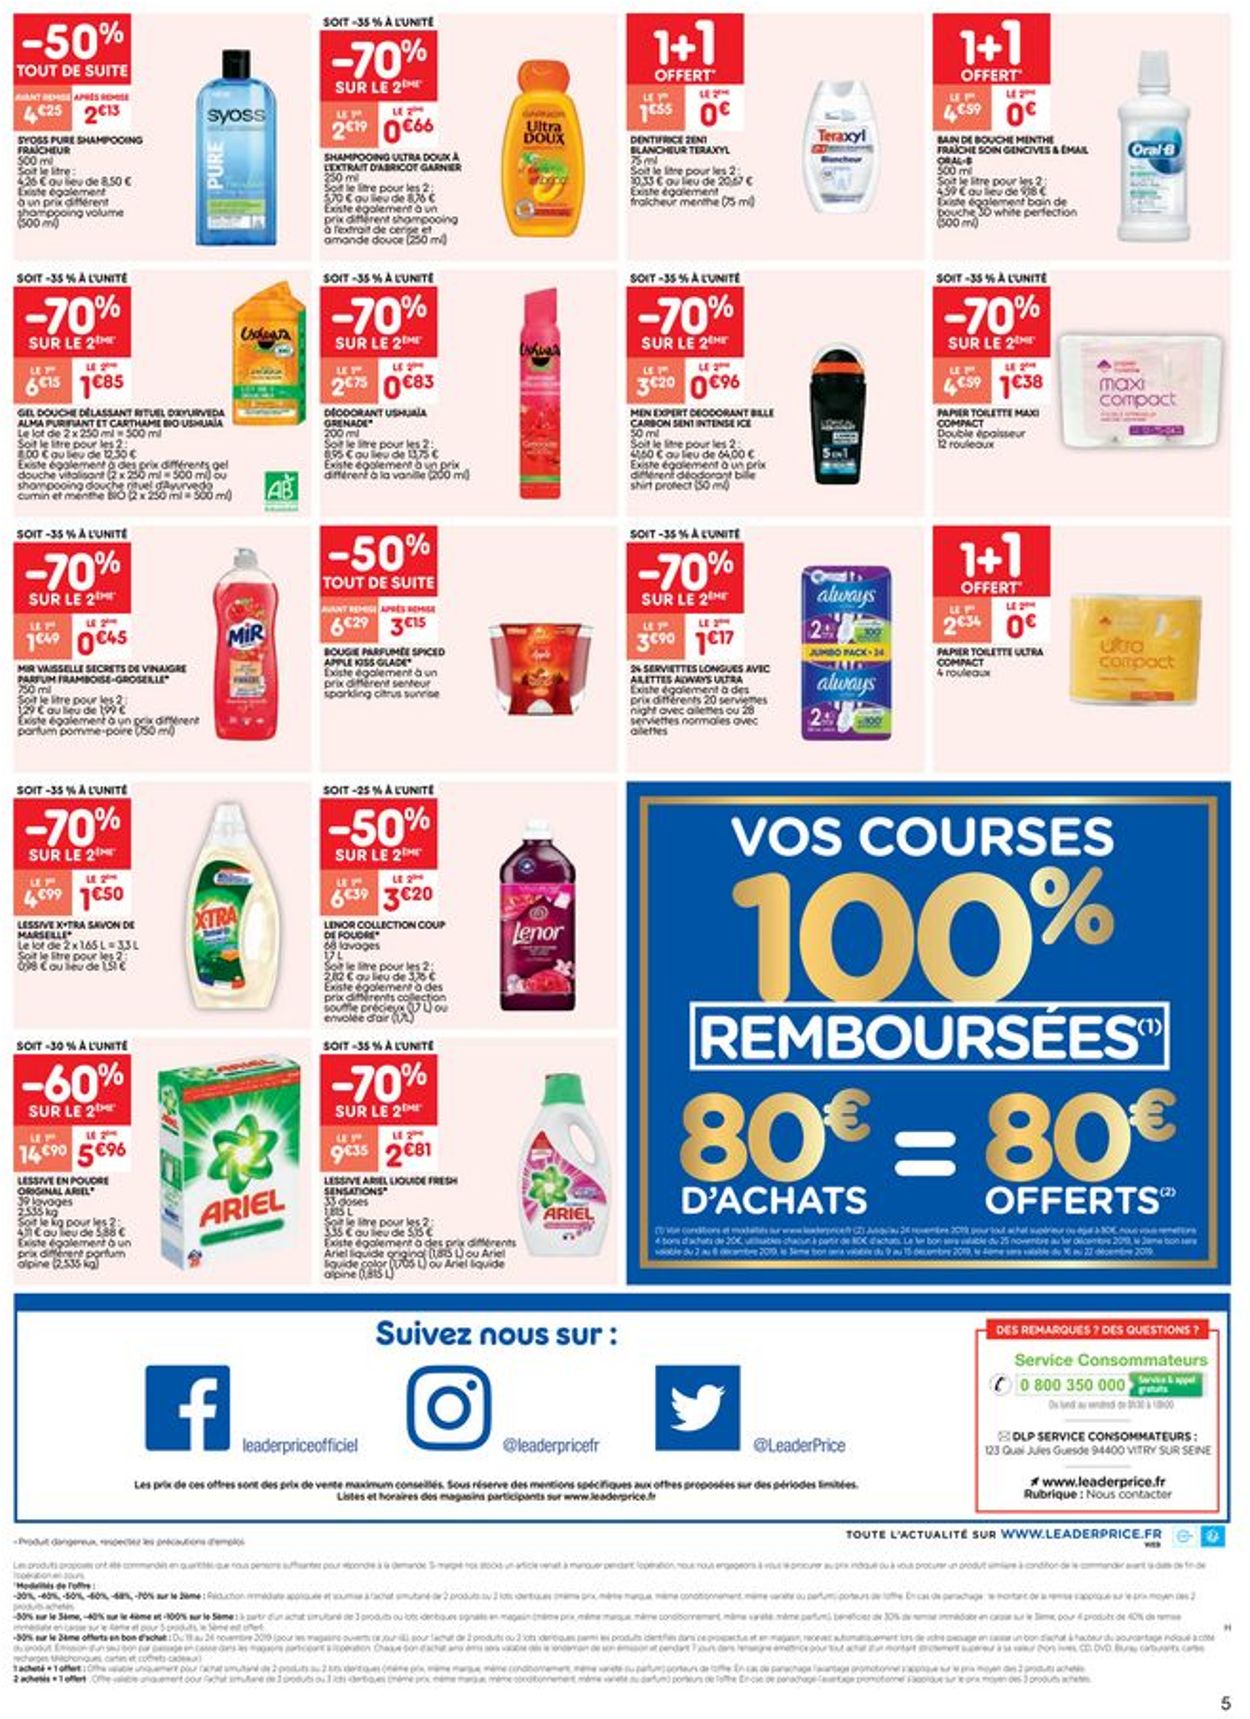 Leader Price Catalogue - 19.11-24.11.2019 (Page 5)